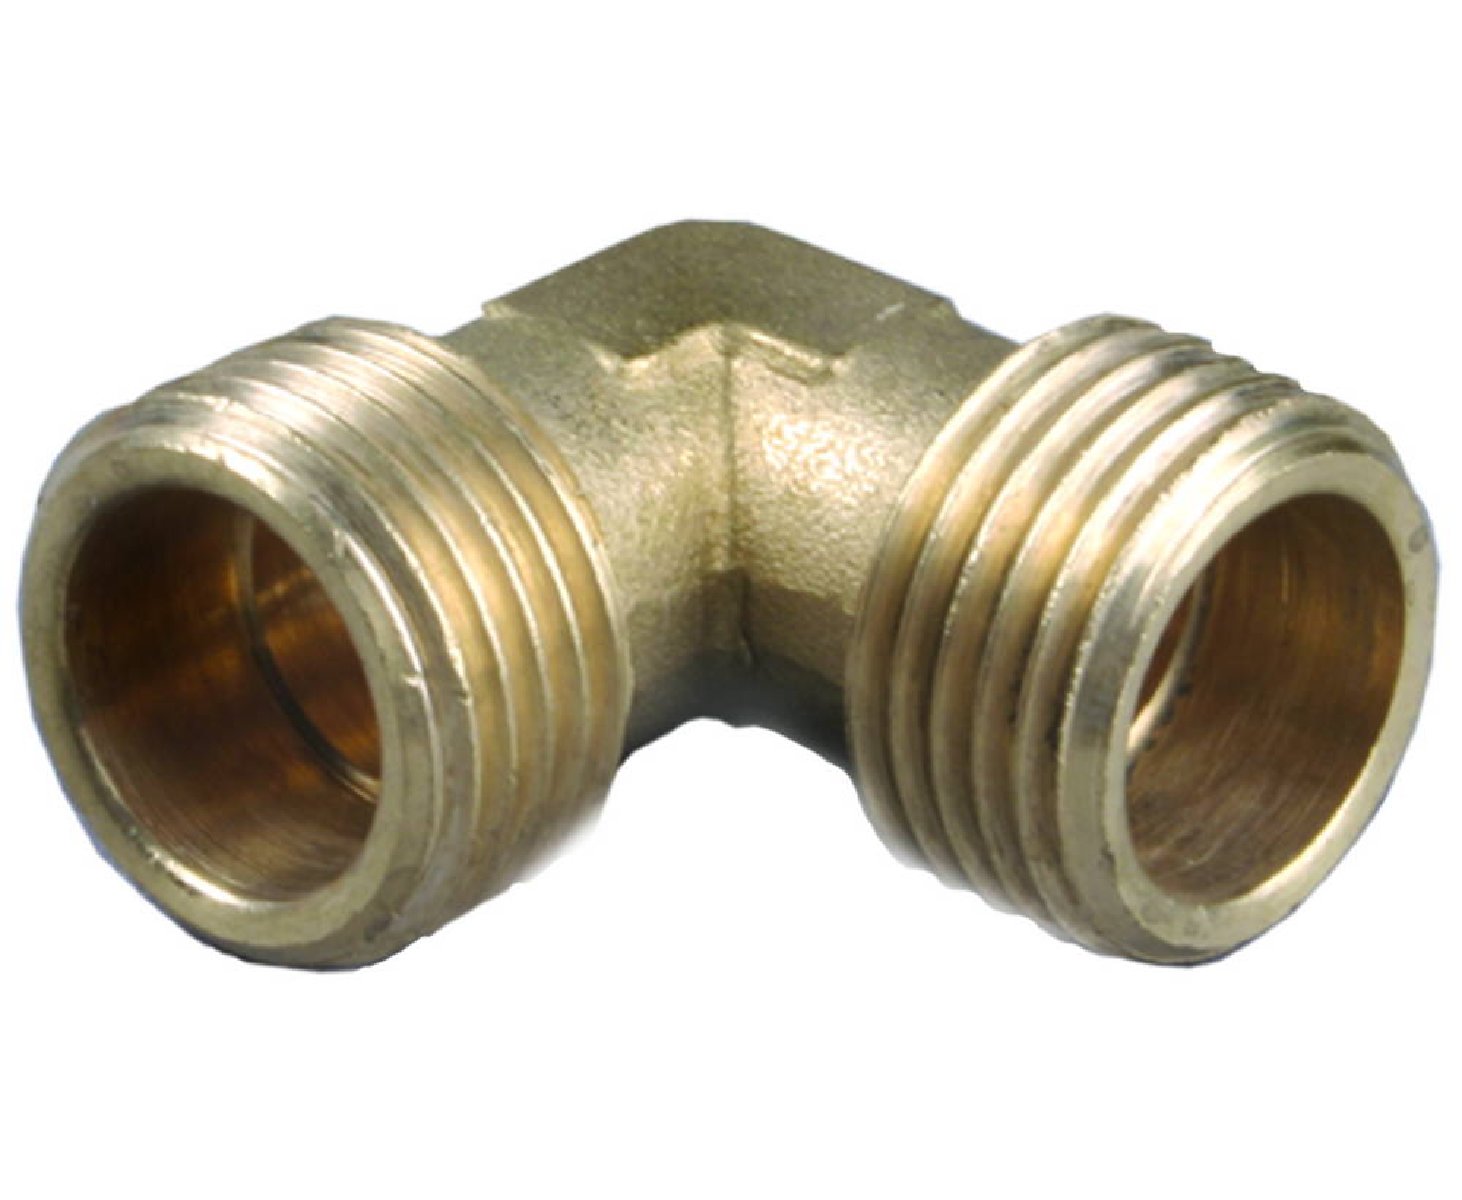  GENERAL FITTINGS   1 2  (51073-S S-1 2)